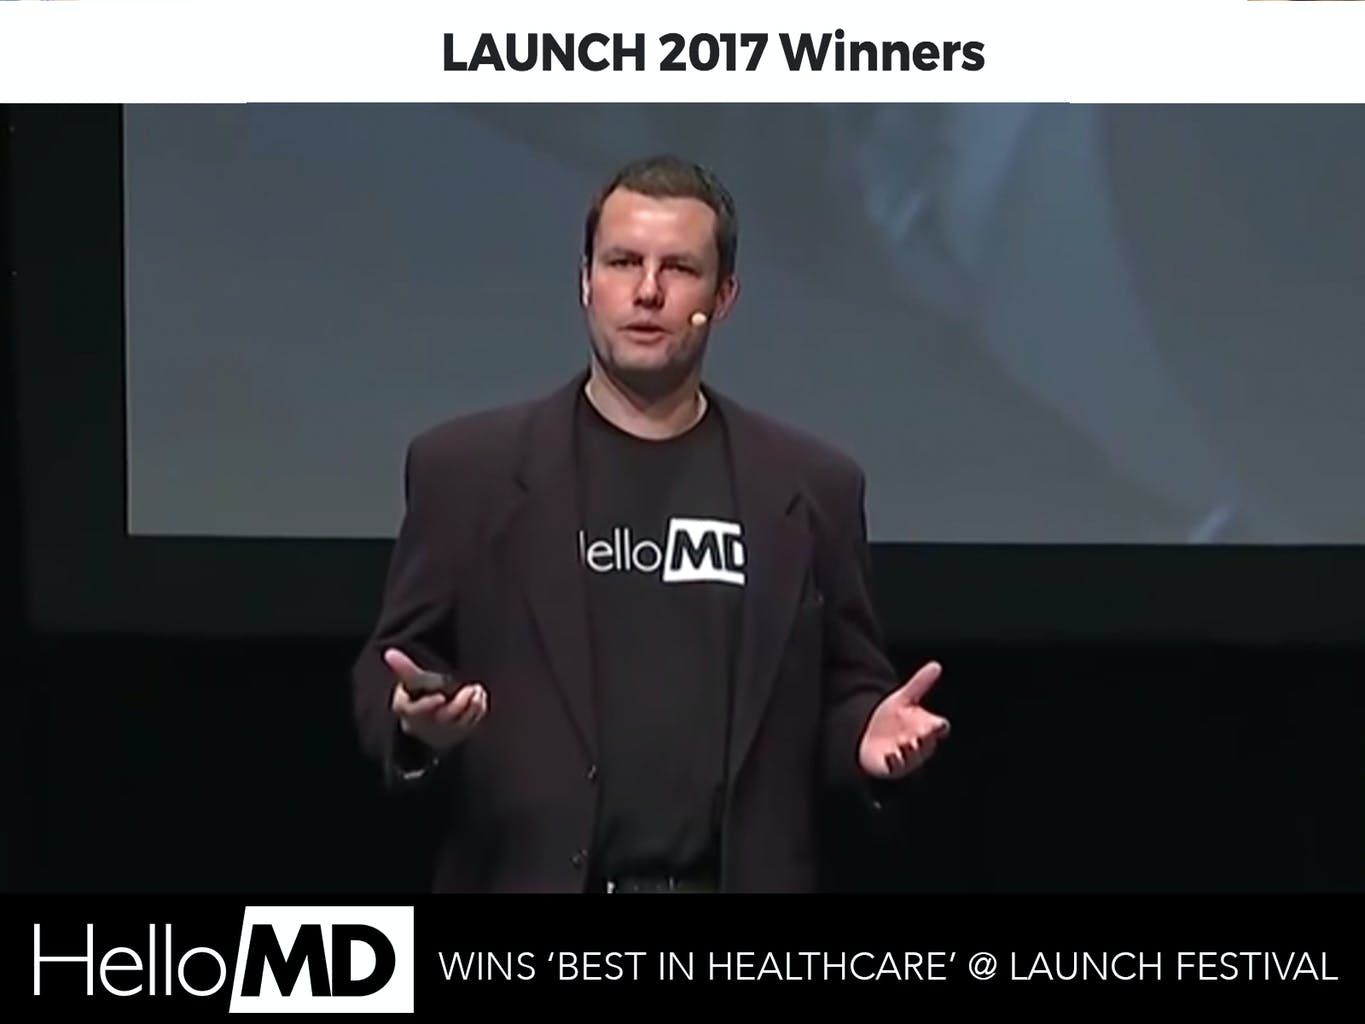 hellomd_wins_best_in_healthcare_at_launch_festival_2017_7f4b411cce